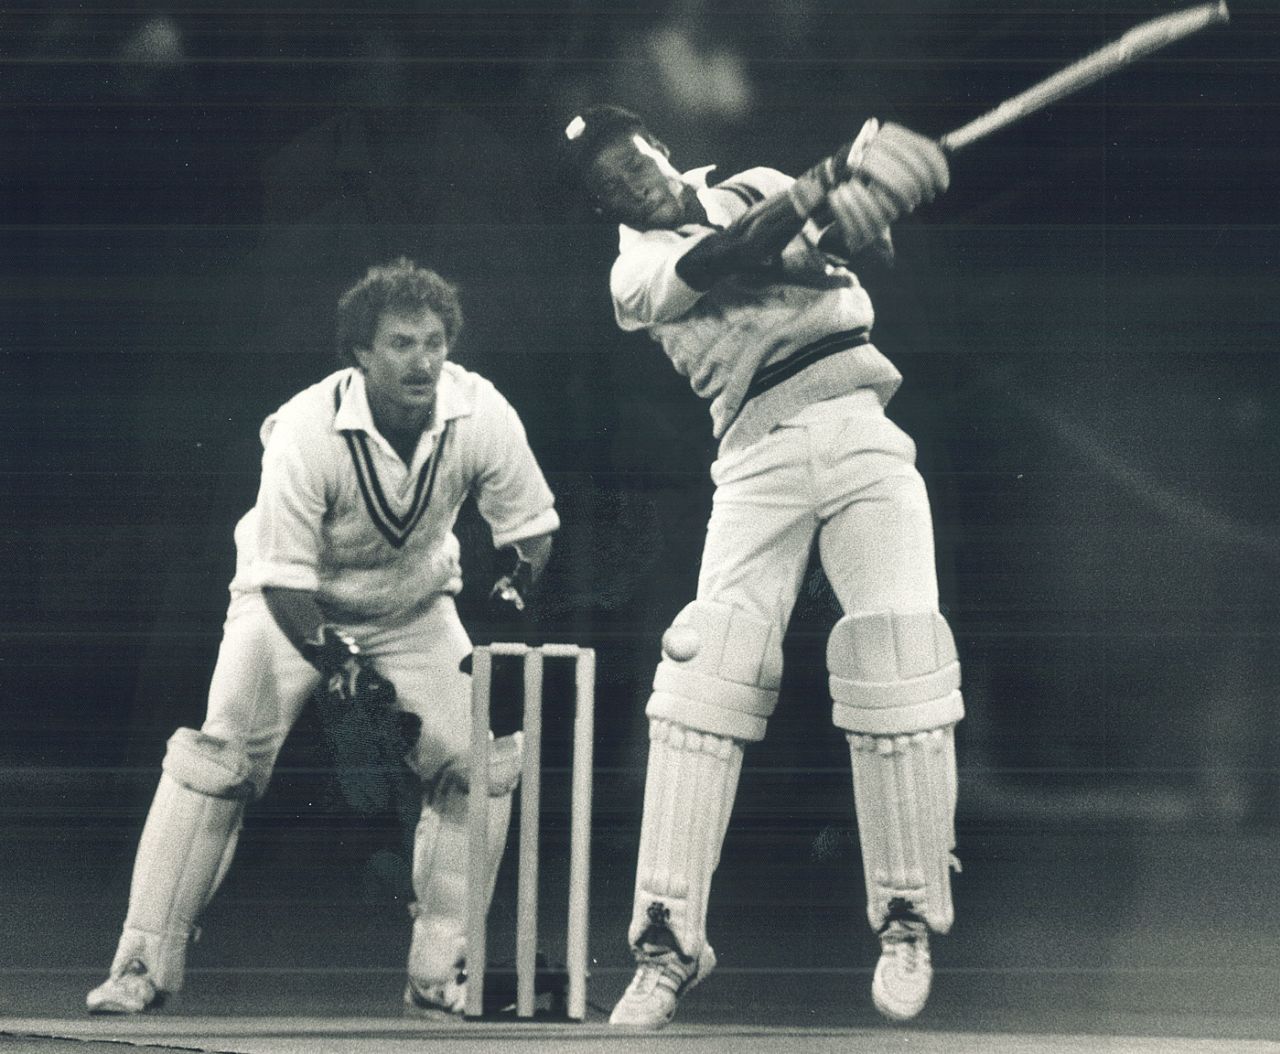 Carlisle Best hits out as Dave Houghton looks on, Rest of the World XI v West Indies XI, United Way Charity Match, Toronto, November 5, 1989